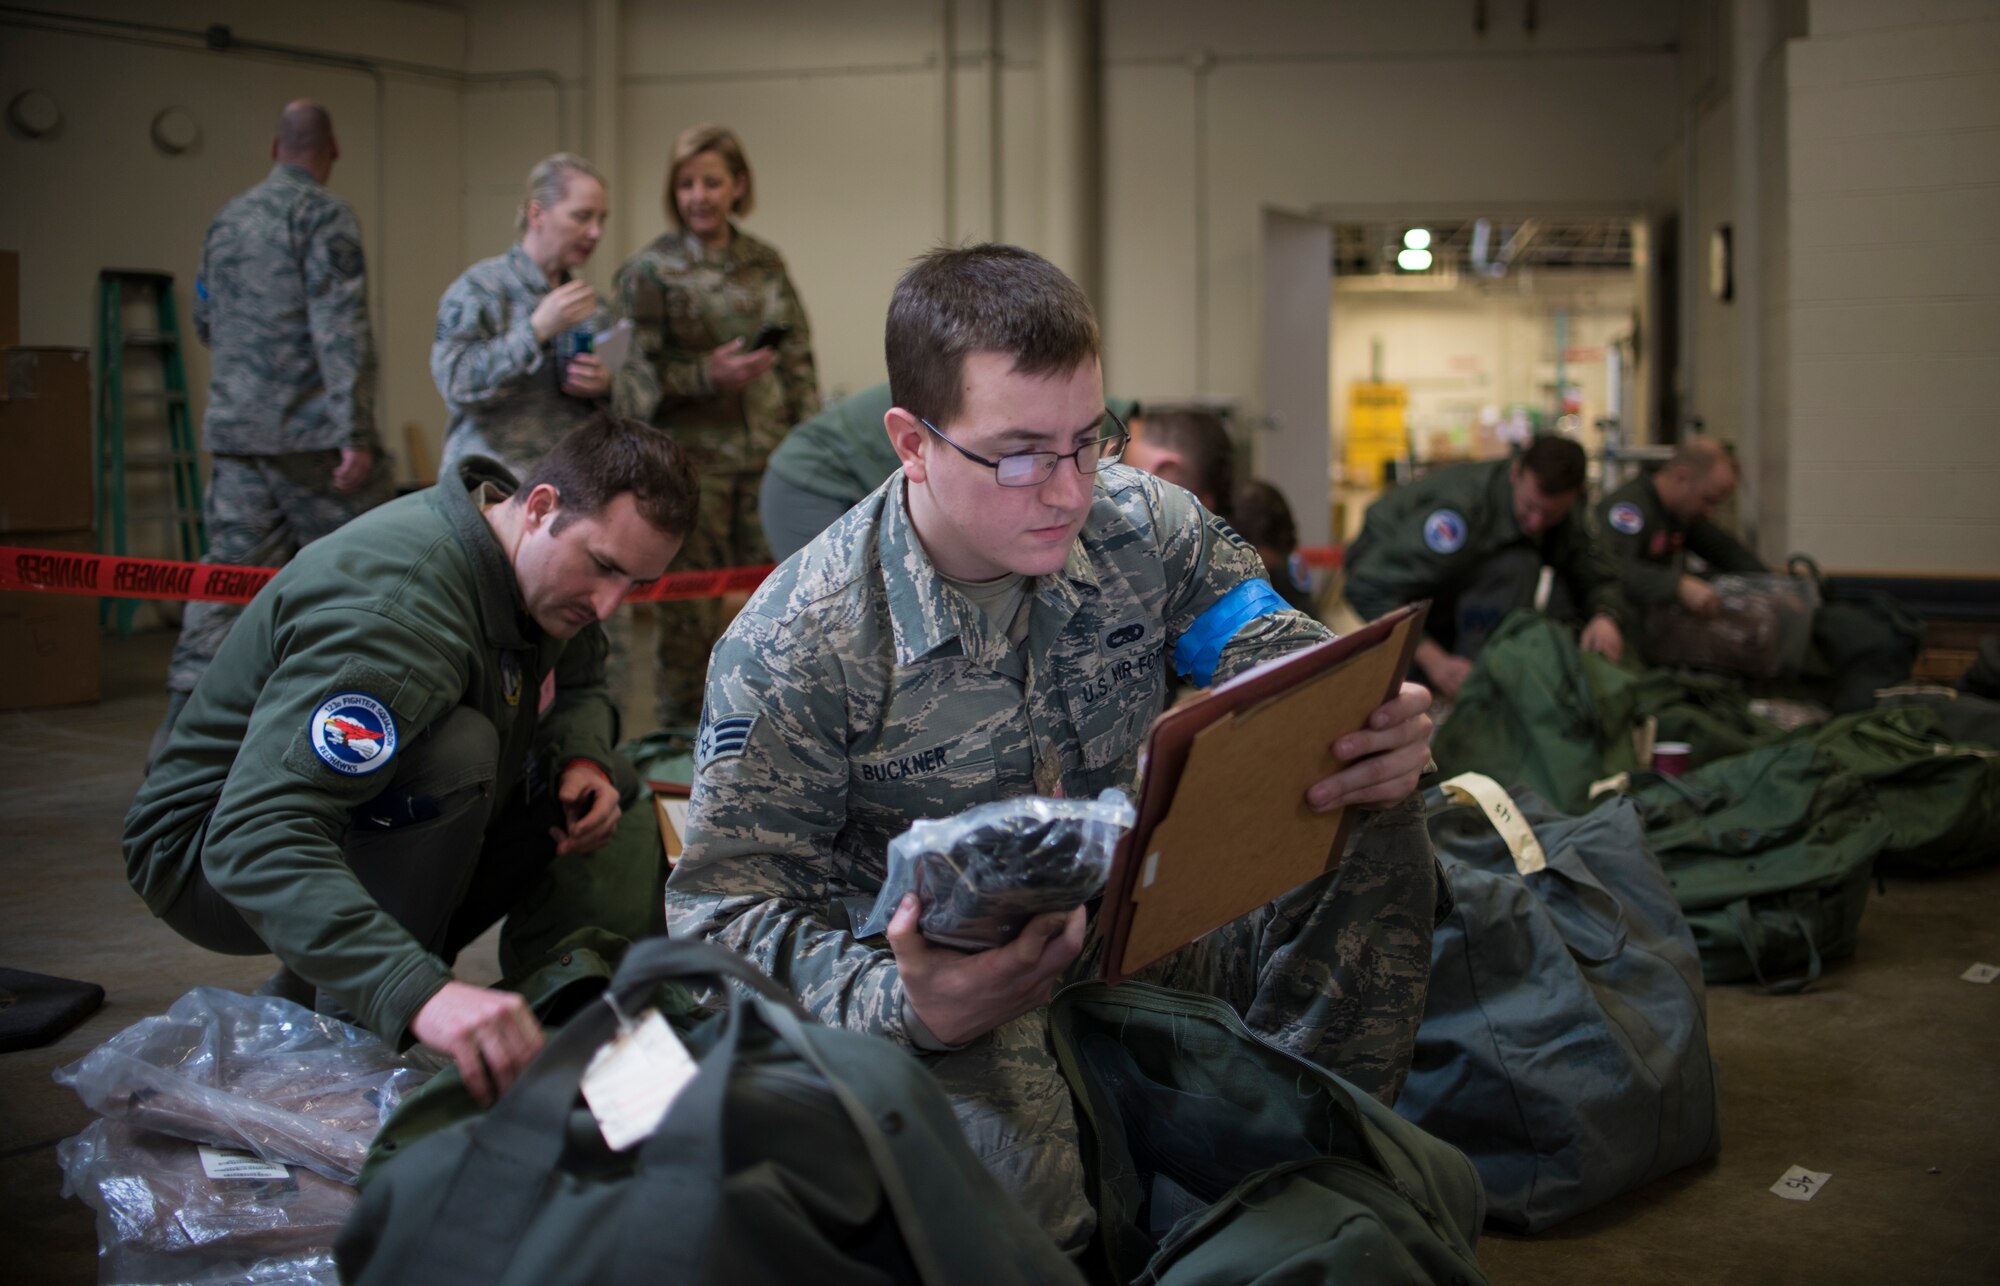 U.S. Air Force Senior Airman Brandon Buckner, assigned to the 142nd Fighter Wing's Maintenance Group, Oregon Air National Guard, reviews a packing list during deployment processing for a Combat Readiness Exercise March 7, 2020, Portland Air National Guard Base, Ore. The exercise simulated a mass deployment of approximately 700 members of the wing. (U.S. Air National Guard photo by Tech. Sgt. Steph Sawyer)